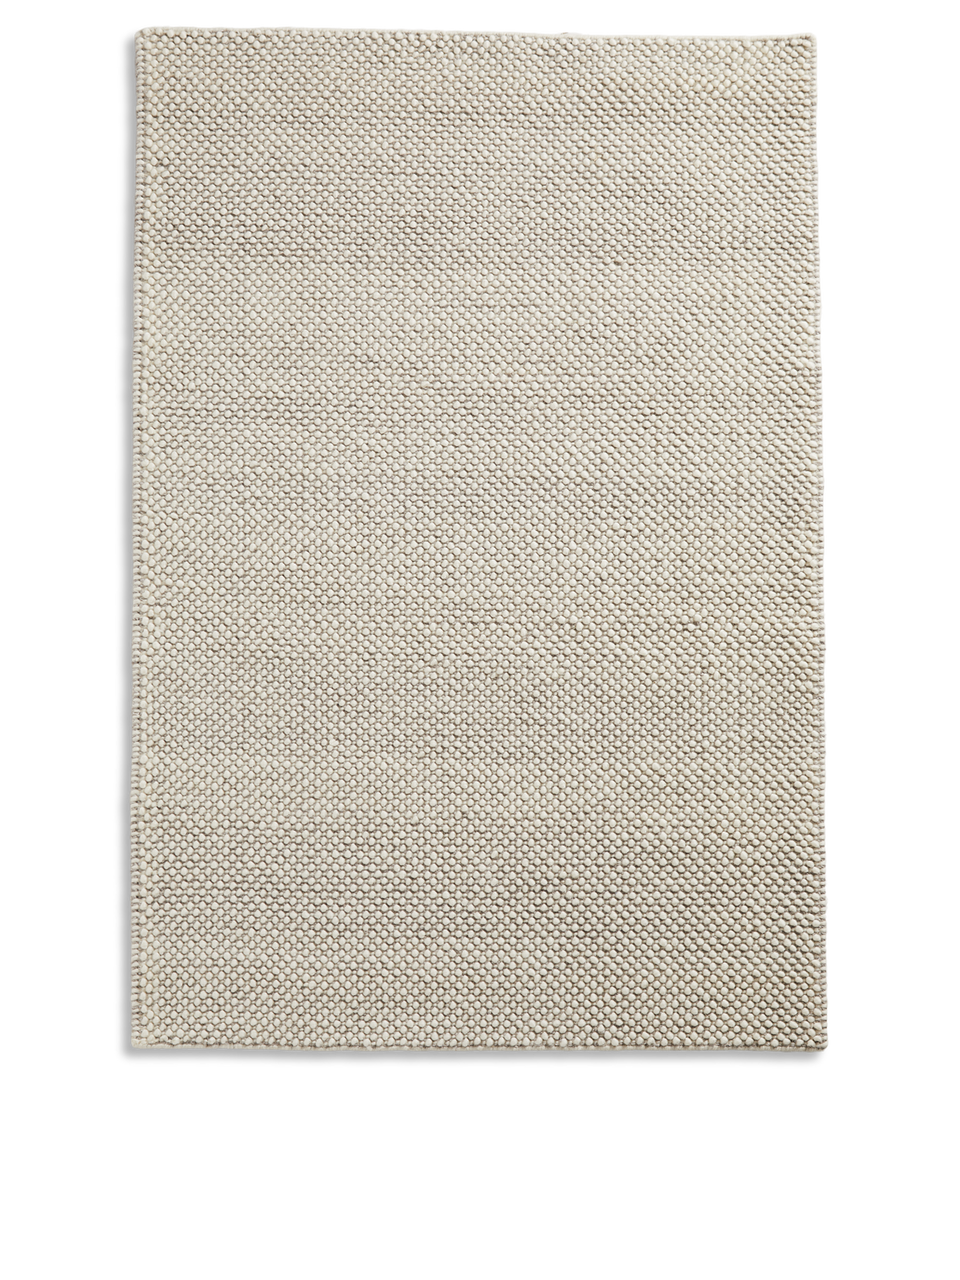 tact rug 6.5’ x 9.8’ off white